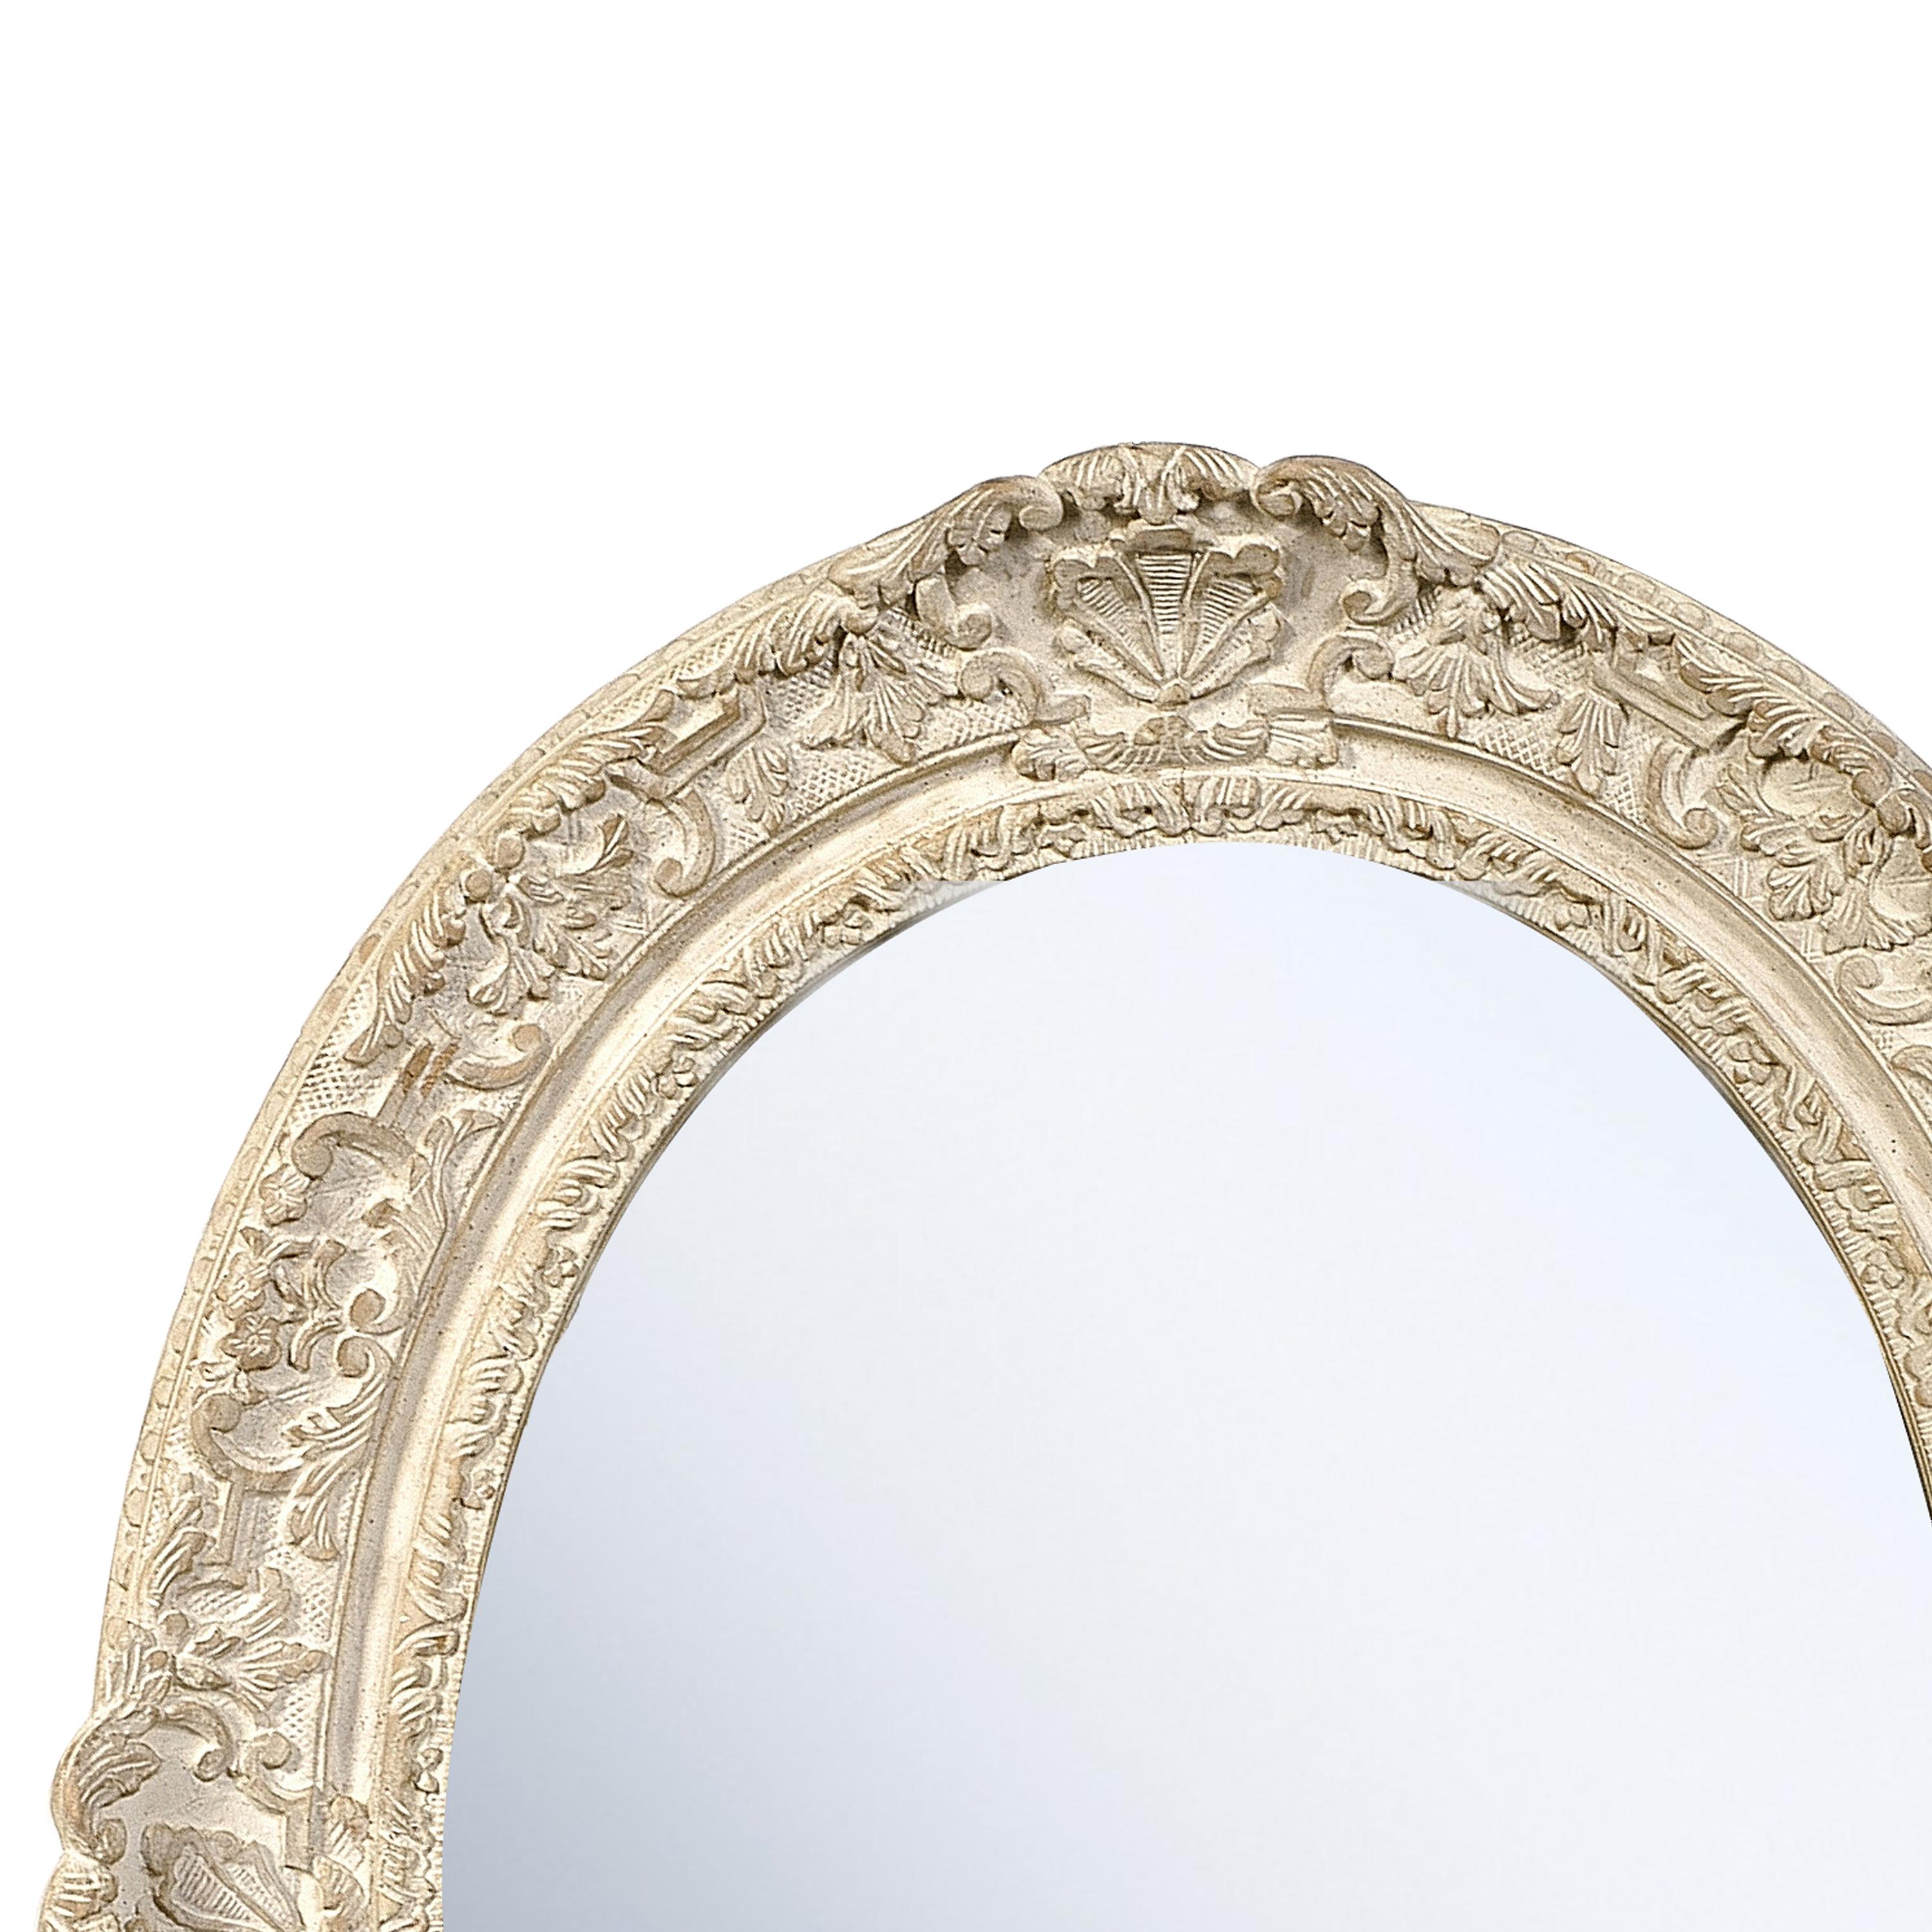 Neoclassical Empire handcrafted mirror. Oval shaped hand carved wooden structure with silver foil finish.
 